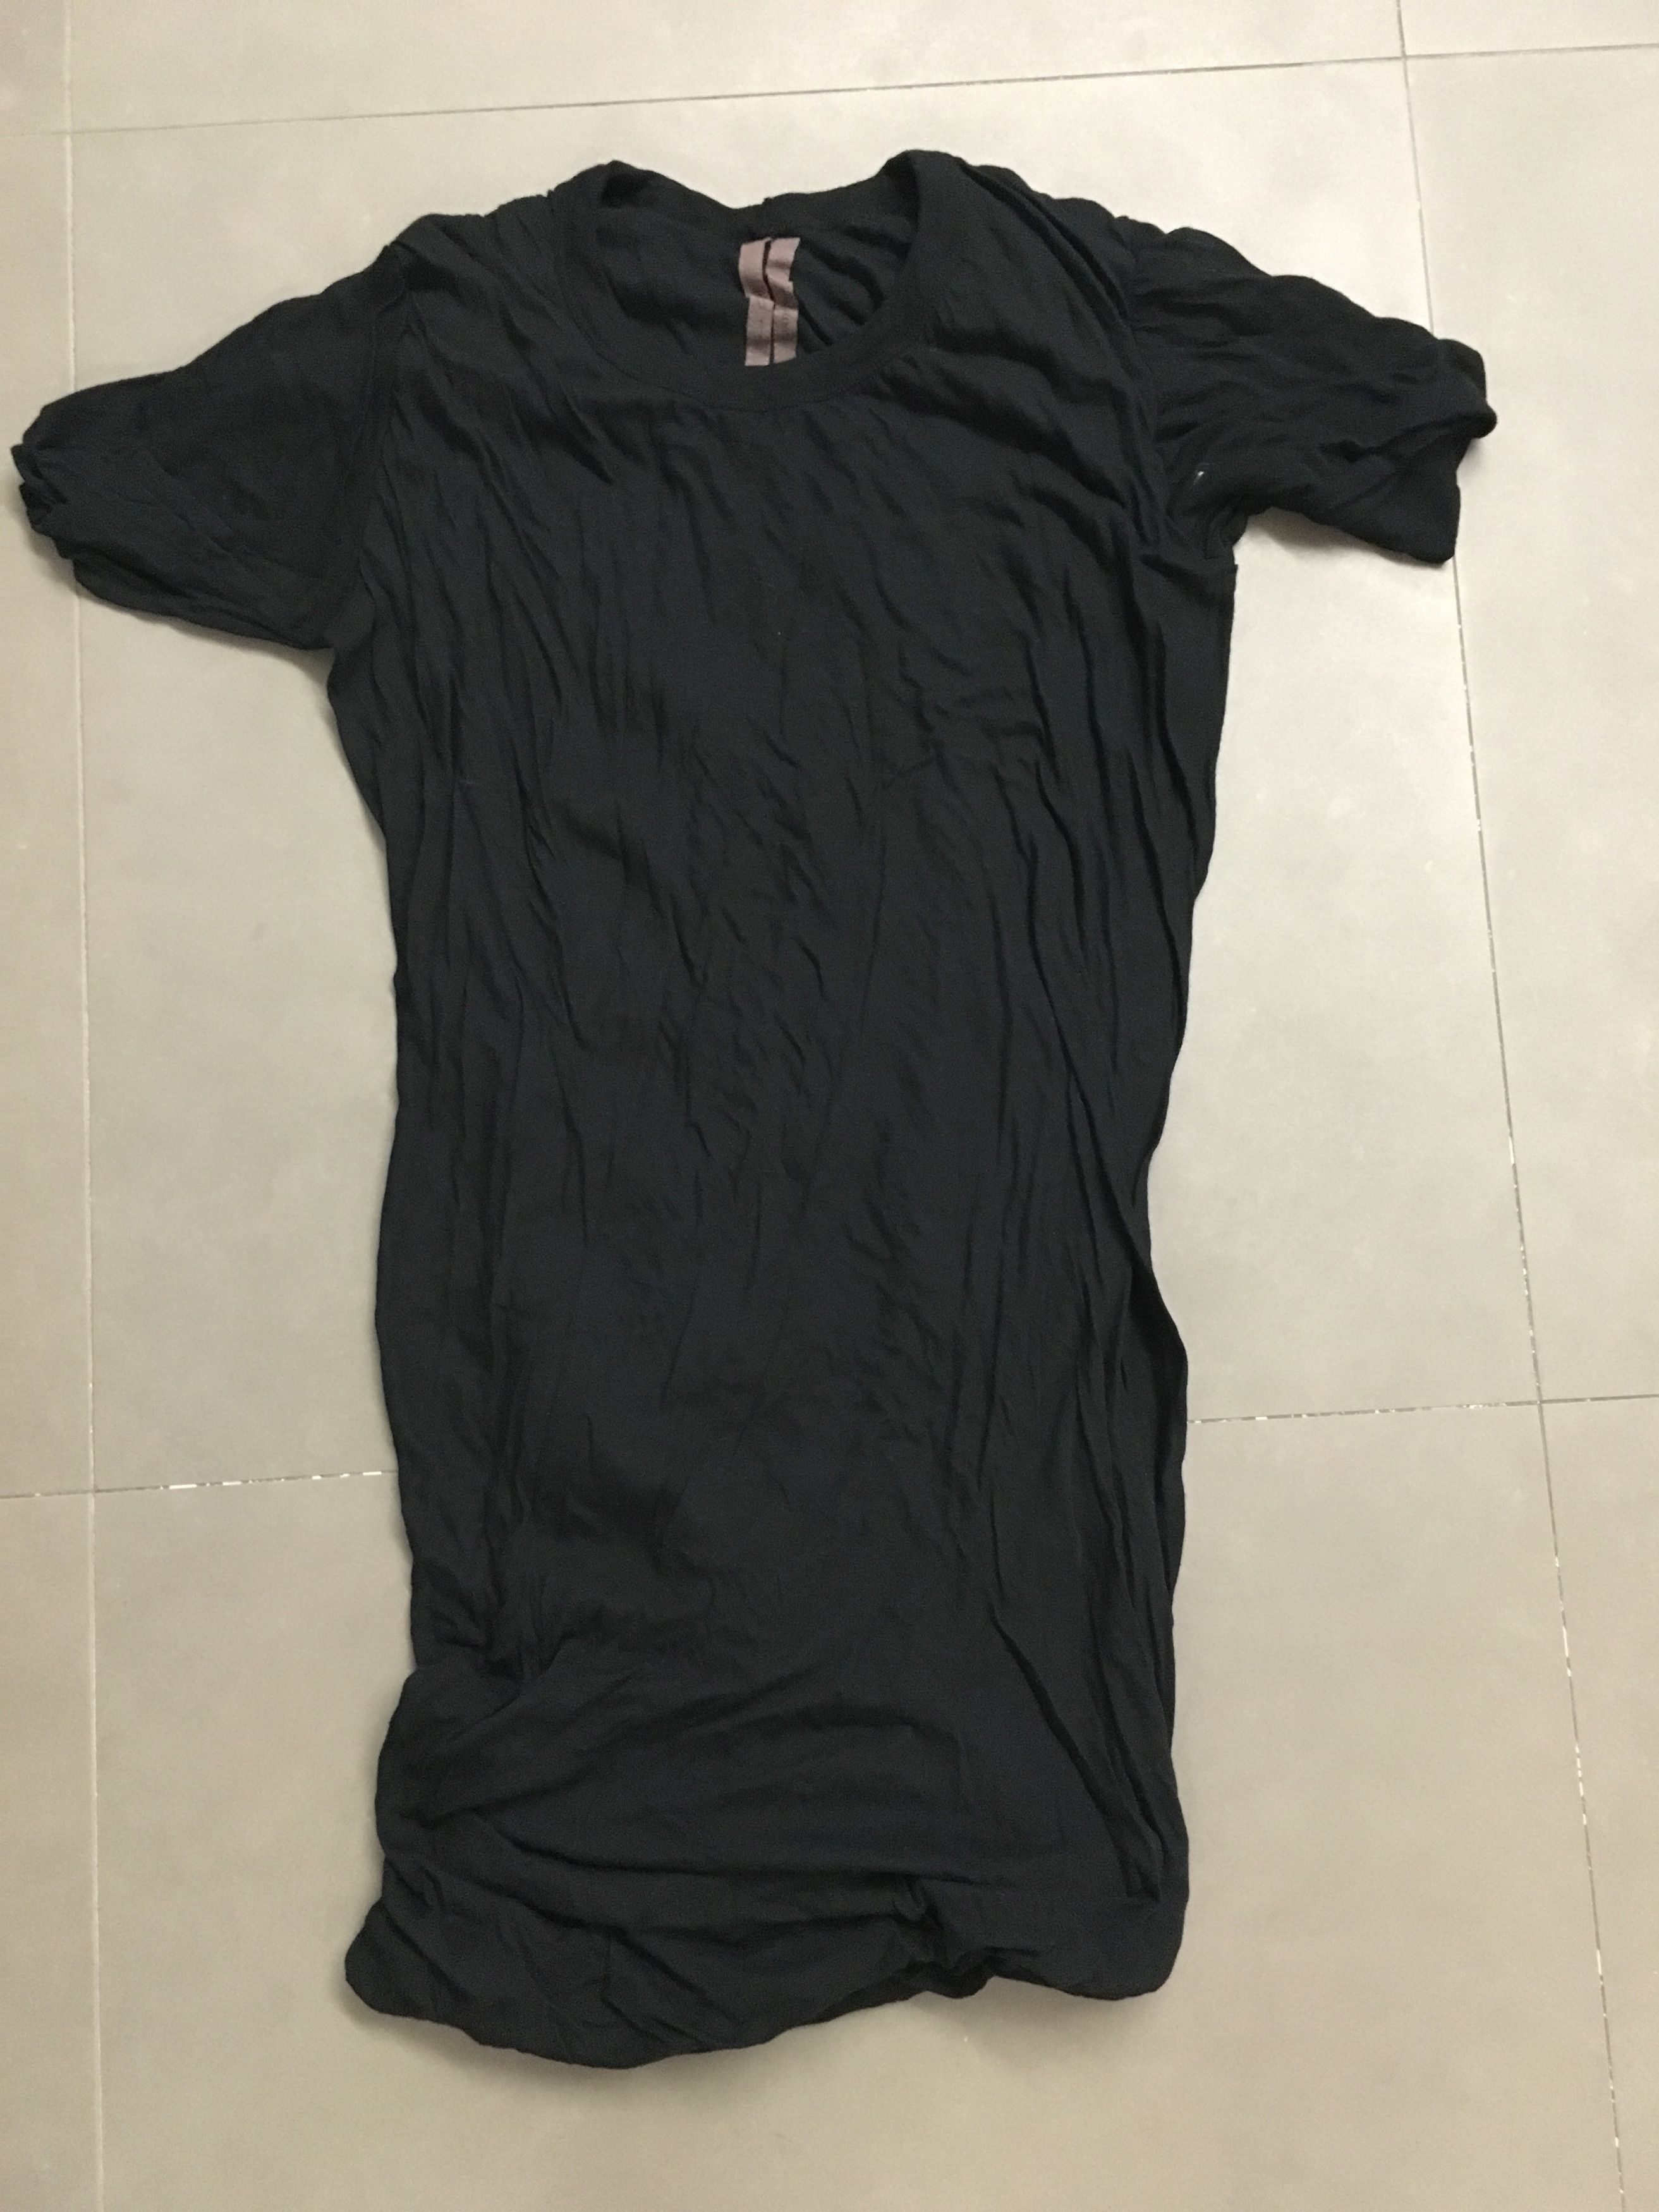 Rick Owens Black Double Layer Short Sleeves Tee Size US S / EU 44-46 / 1 - 2 Preview